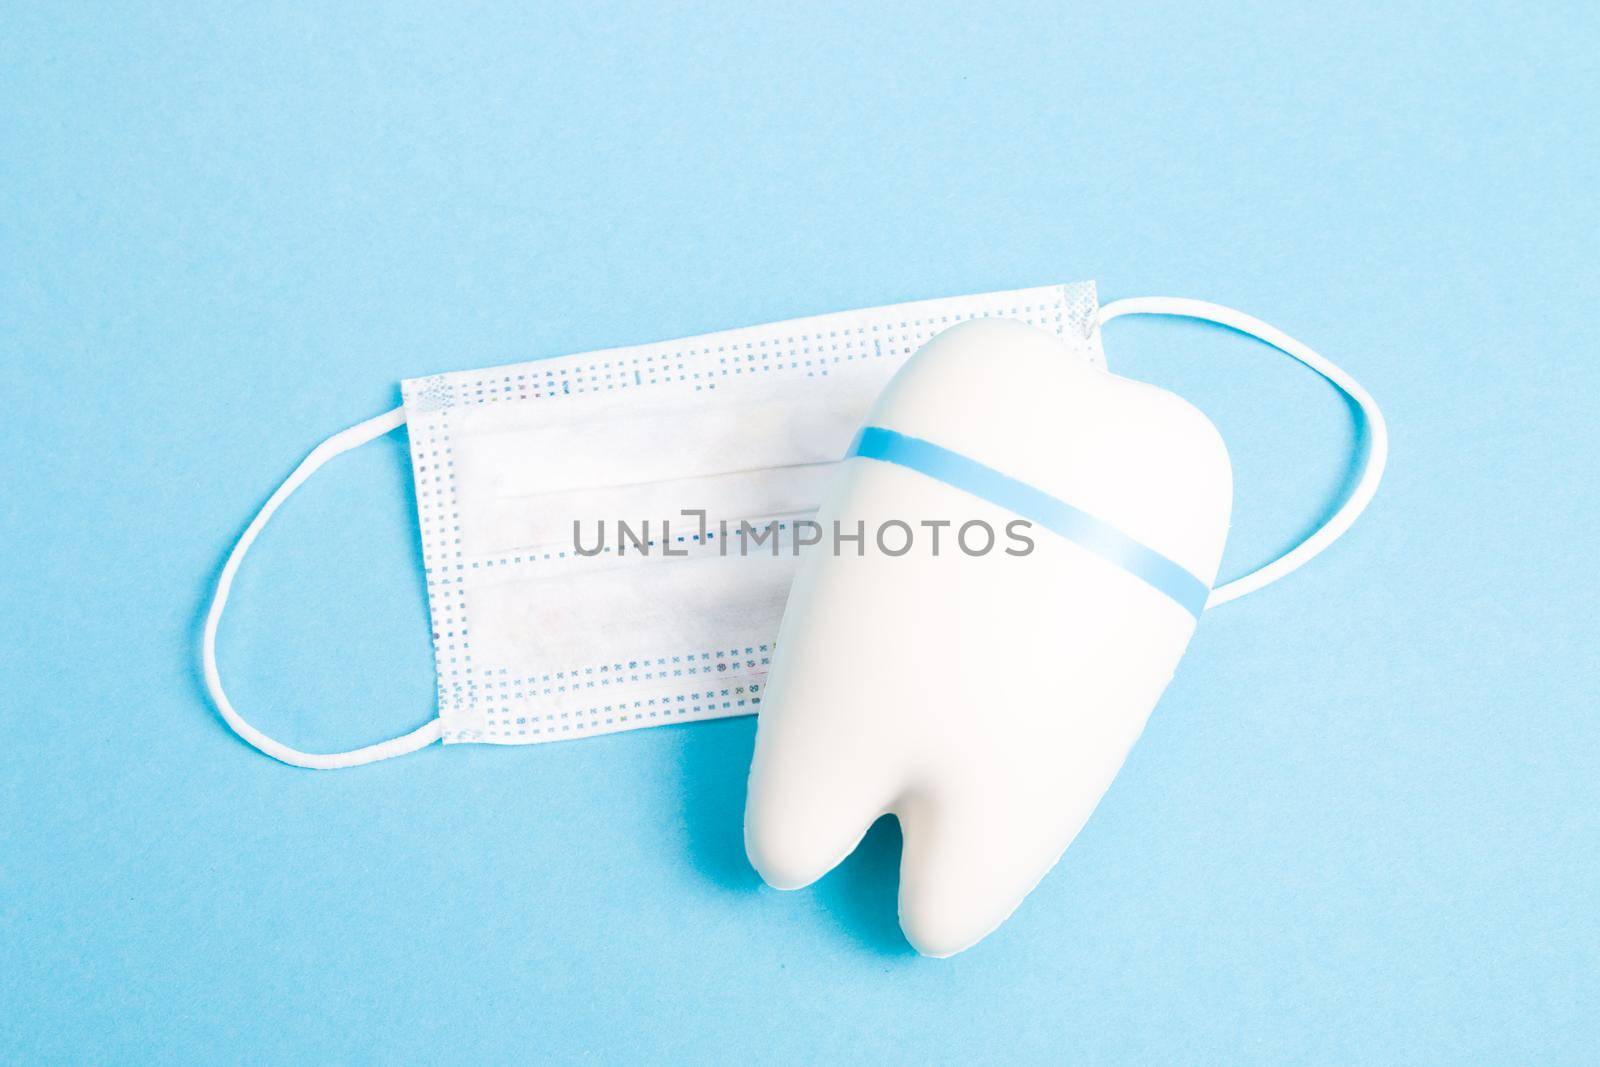 white tooth model and children's medical visceral mask on a blue background copy space, dentistry concept, toothache dental treatment